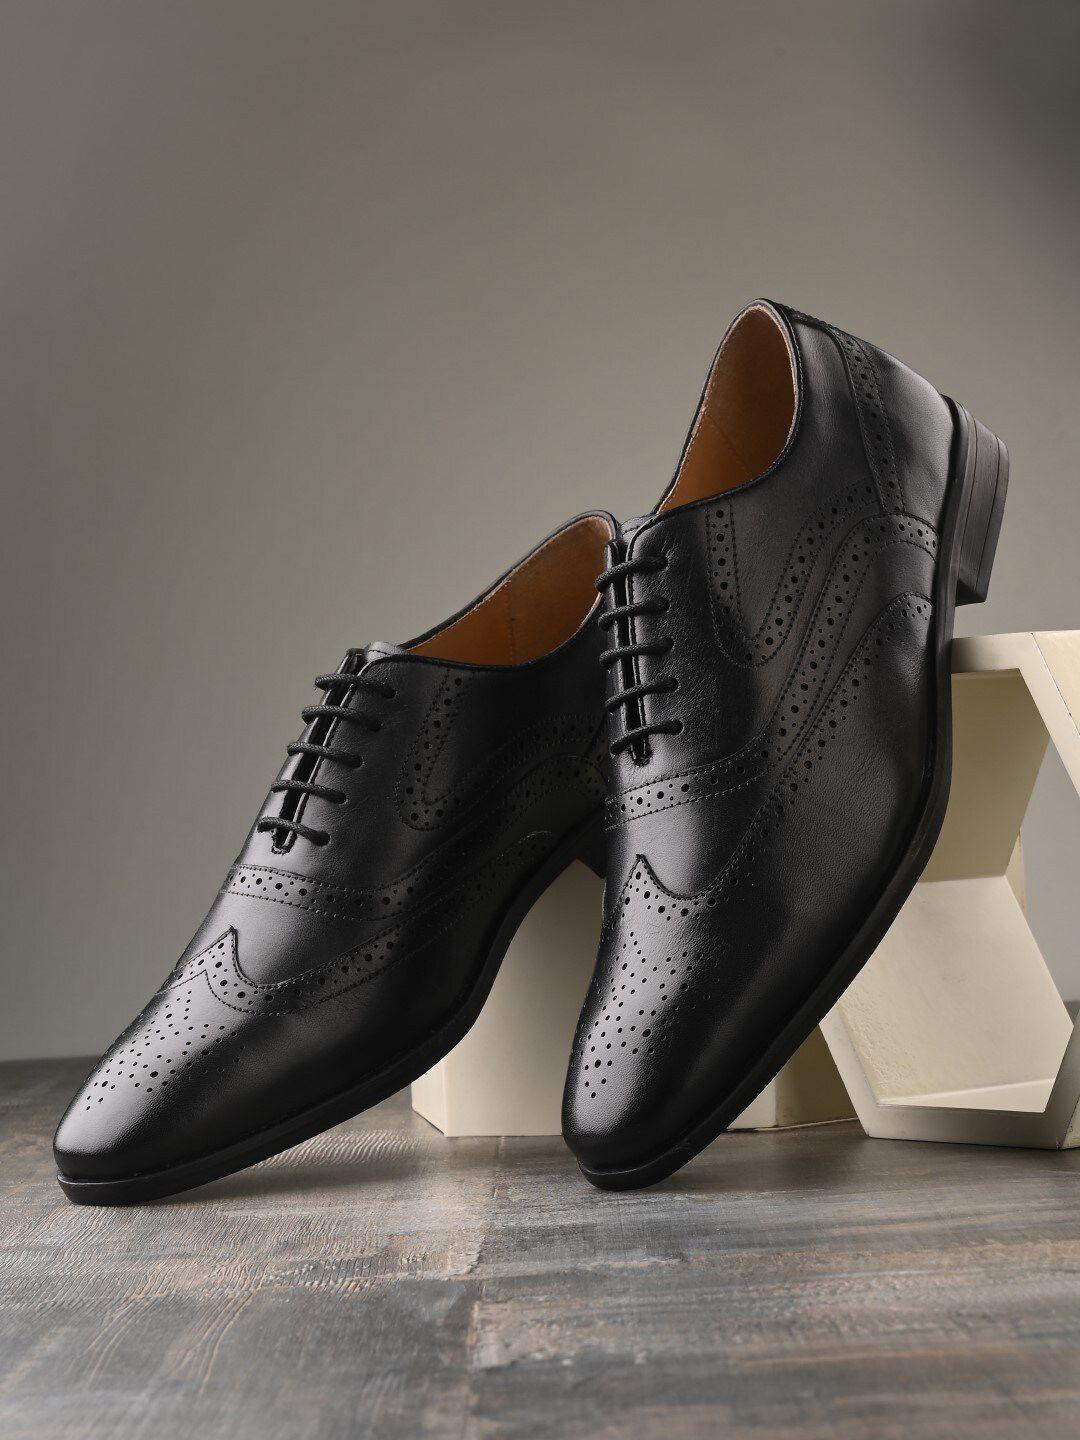 house of pataudi men perforated leather  formal brogues